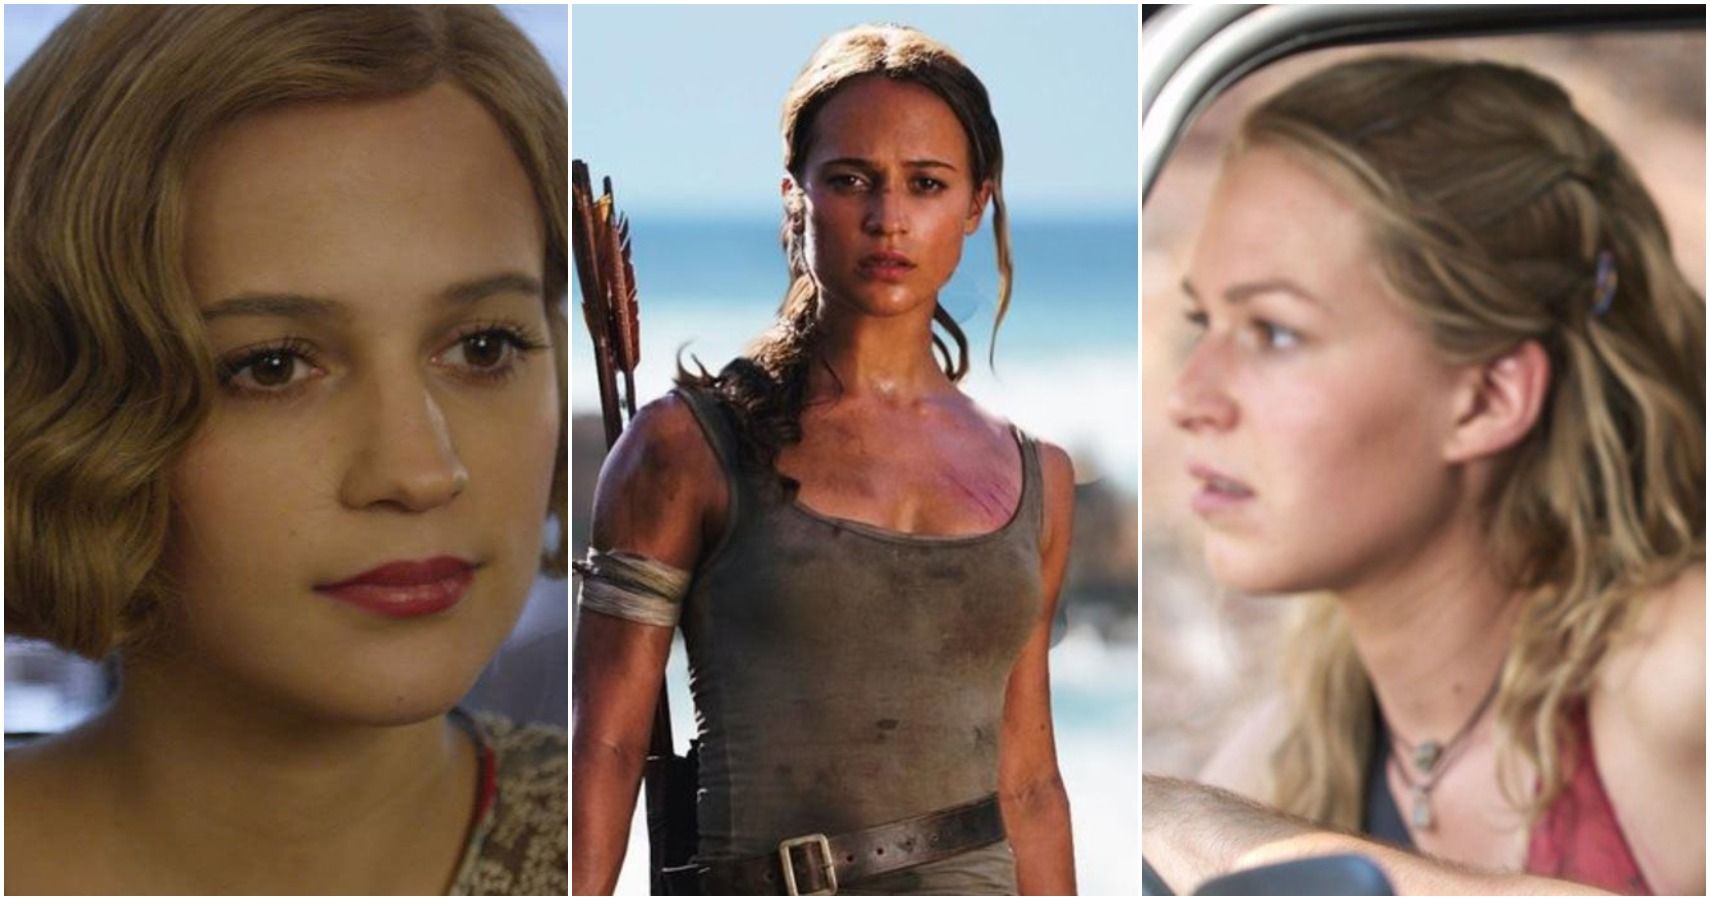 Alicia Vikander Inspired to Get More Women in Movies